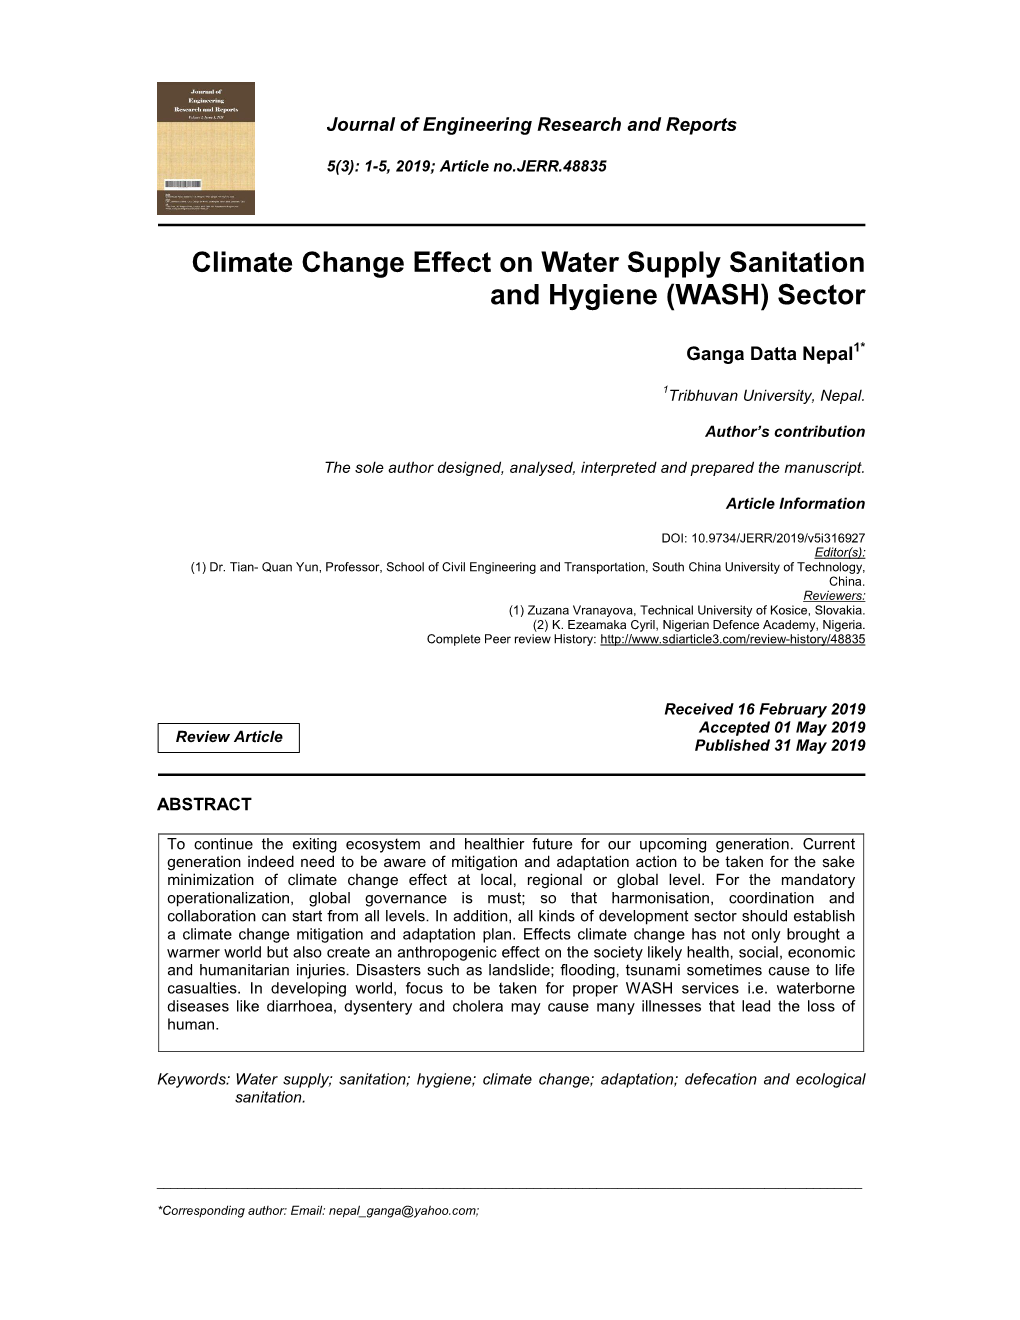 Climate Change Effect on Water Supply Sanitation and Hygiene (WASH) Sector